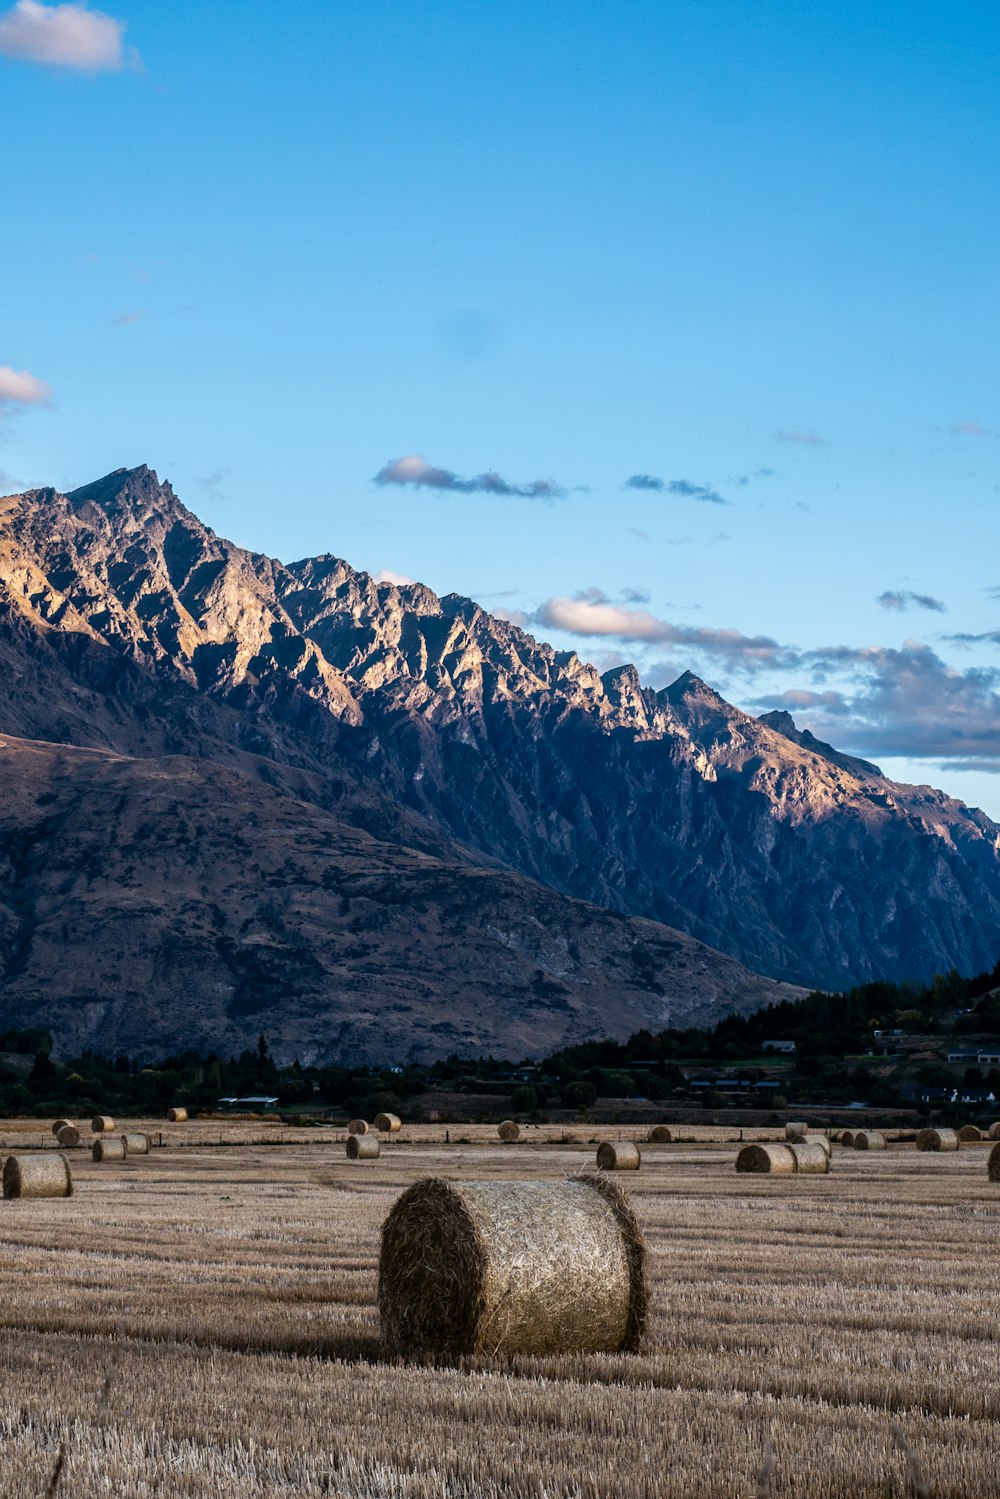 bales of hay in a field with mountains in the background